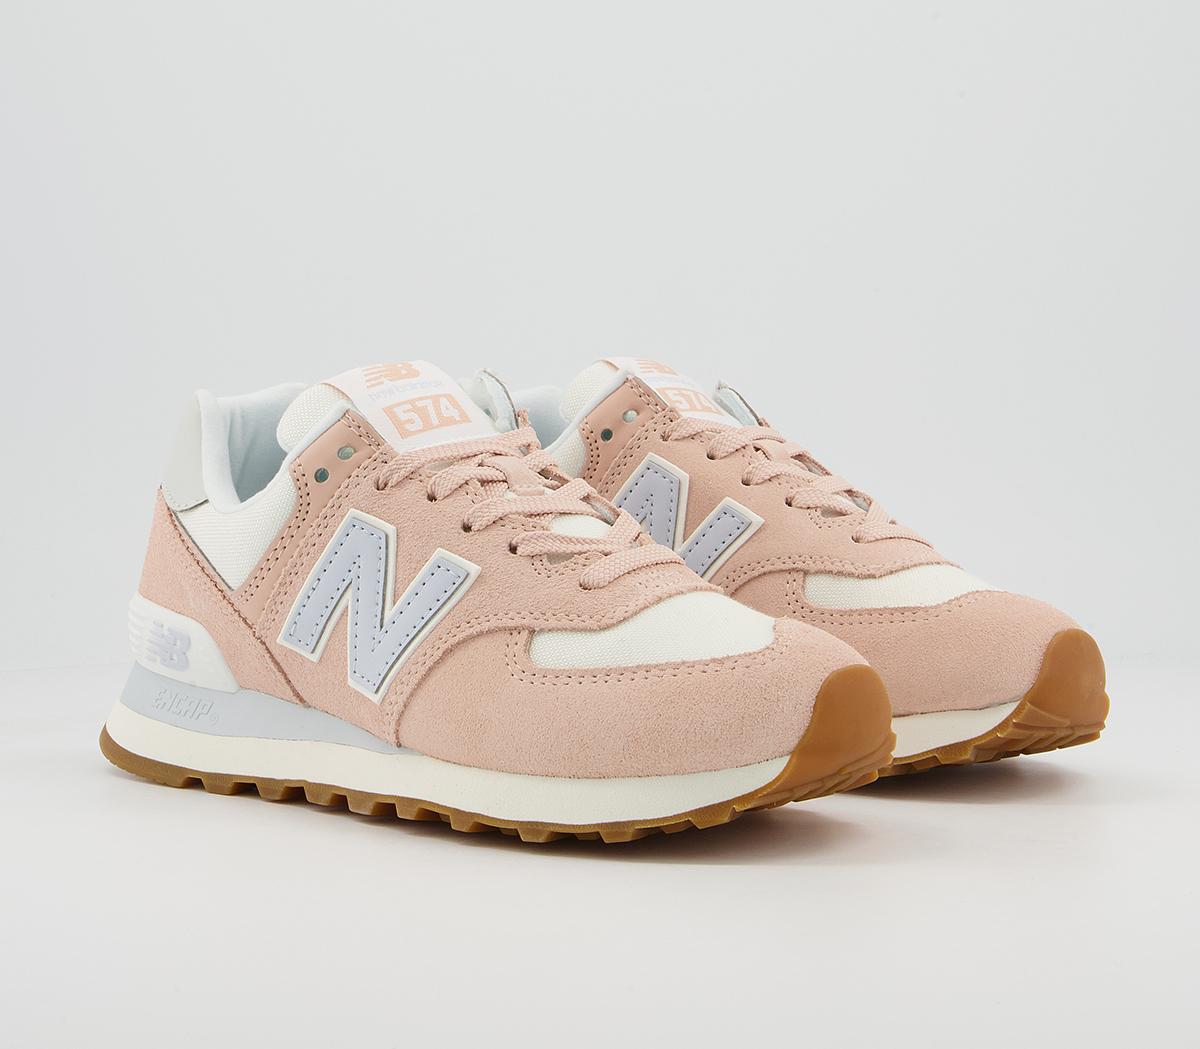 New Balance 574 Trainers Rose Water - Women's Trainers